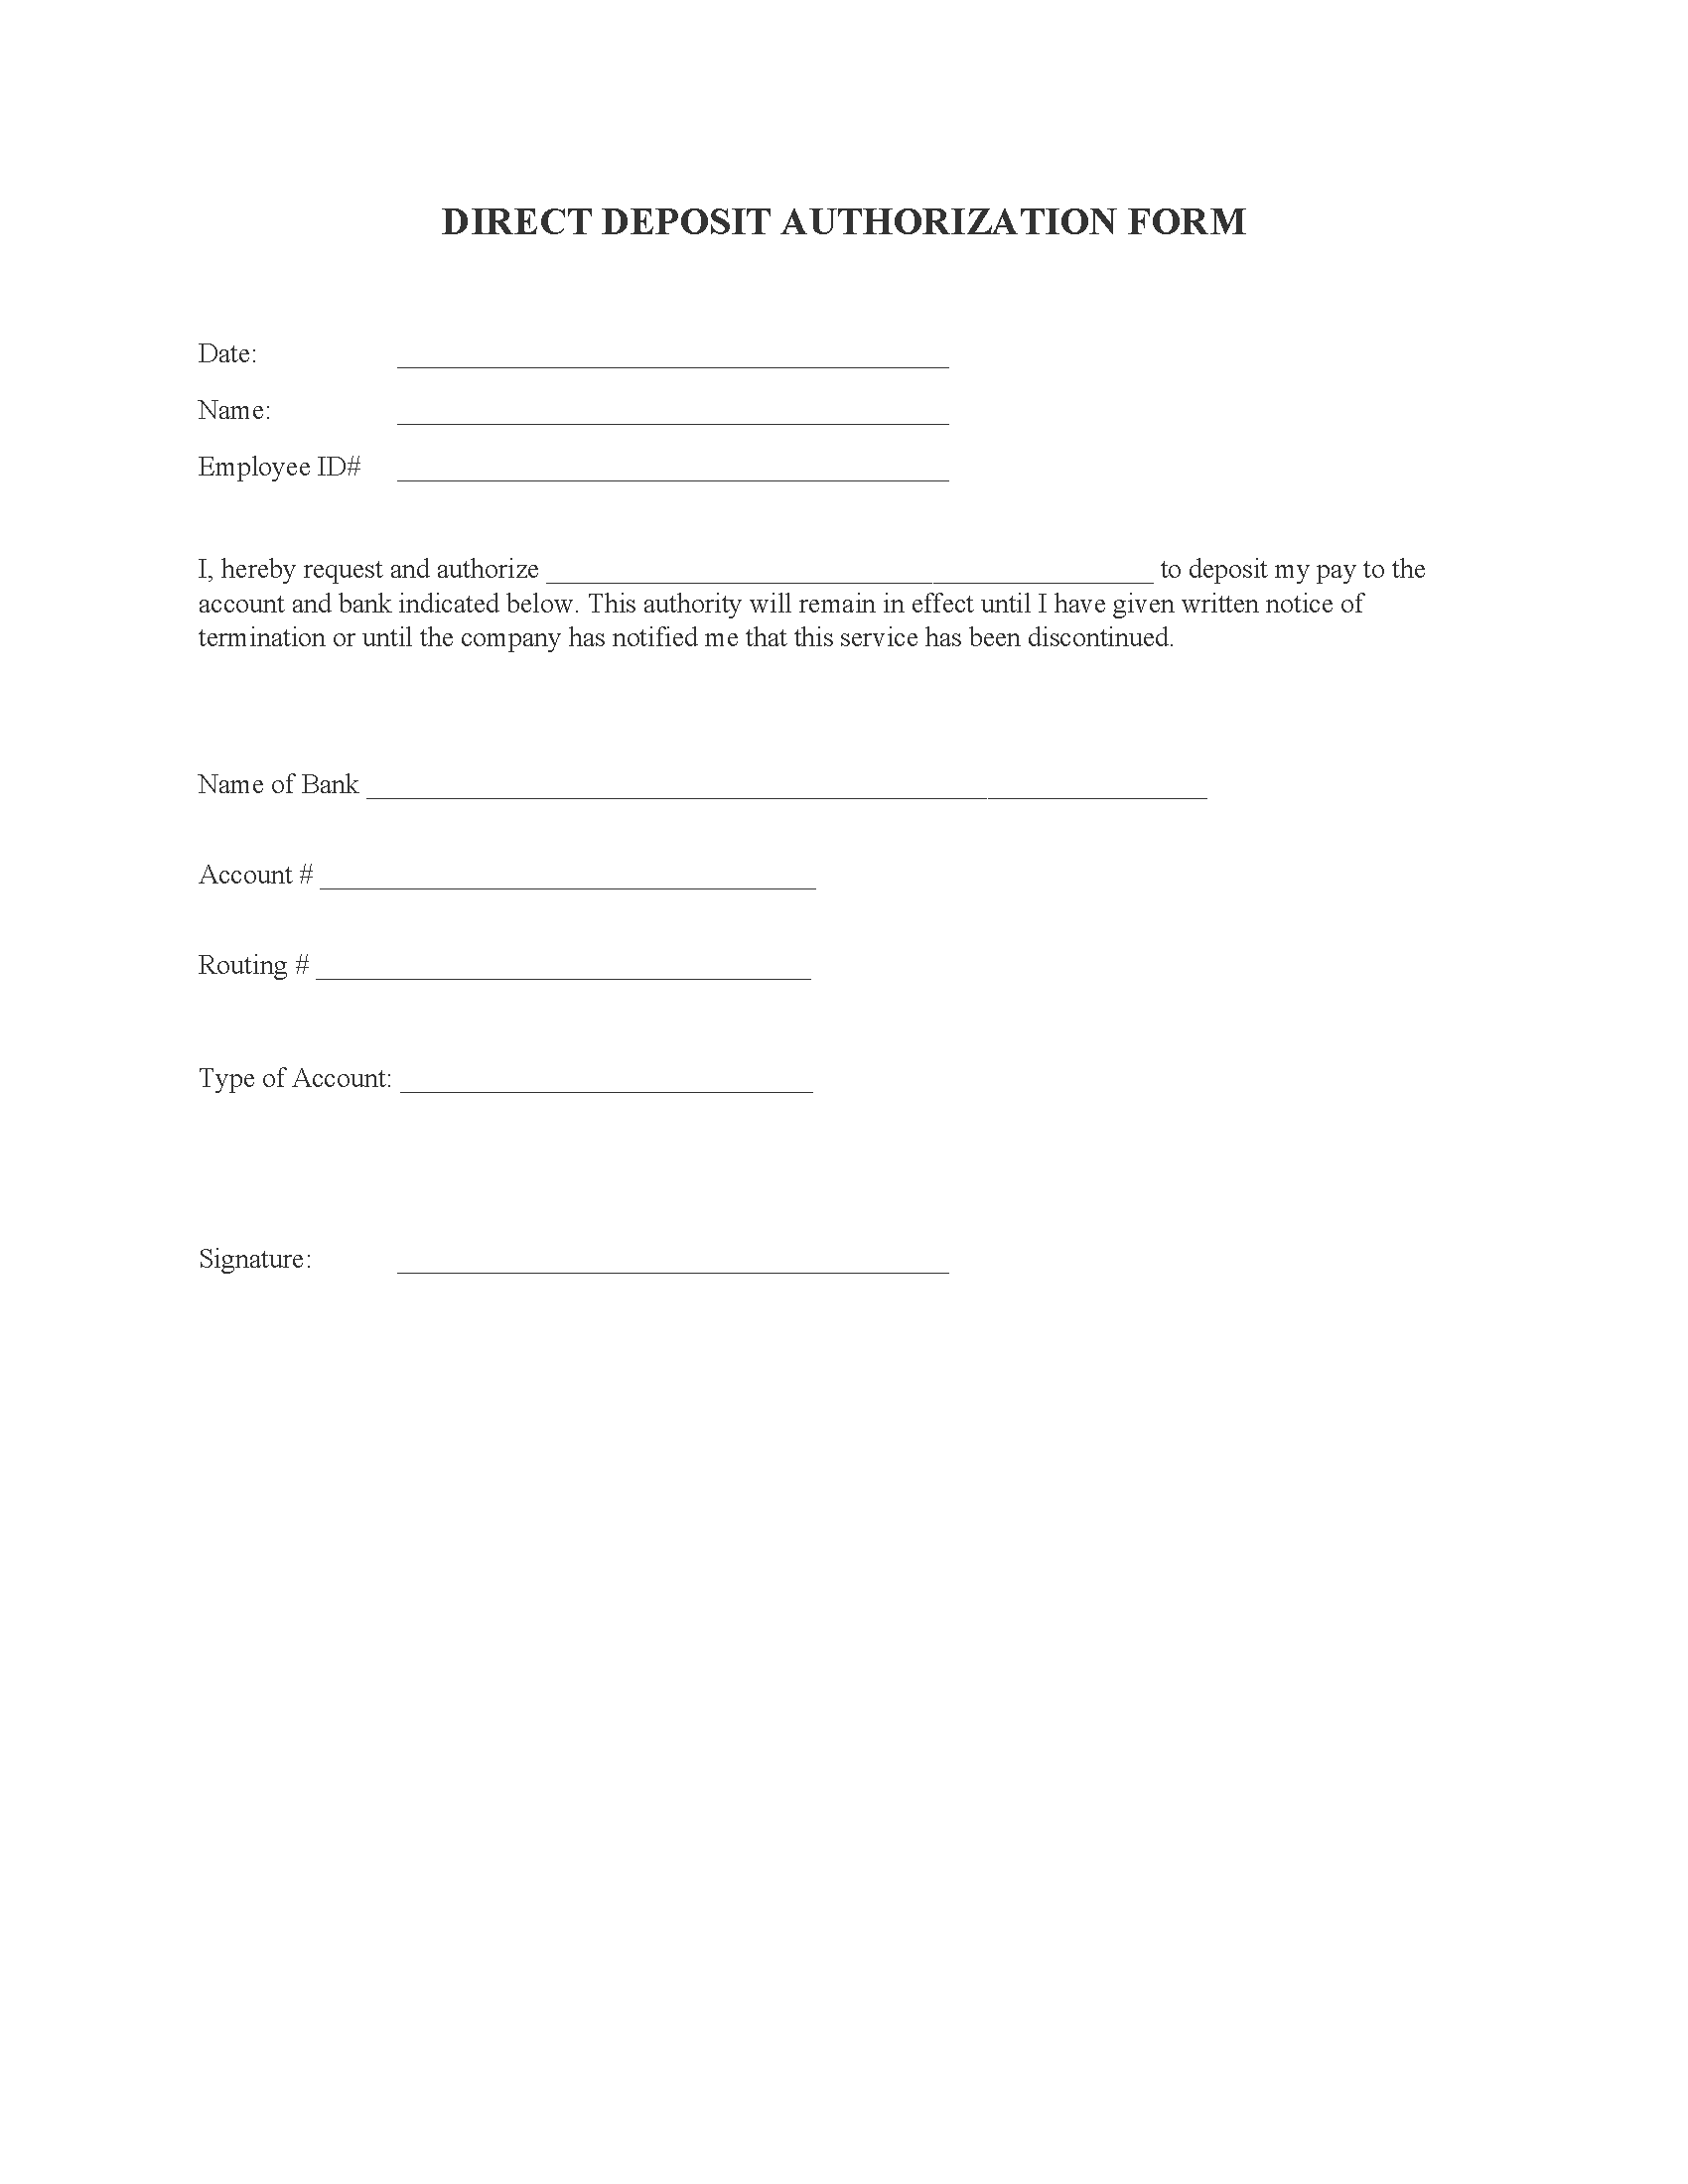 Direct Deposit Authorization Form Free Printable Legal Forms